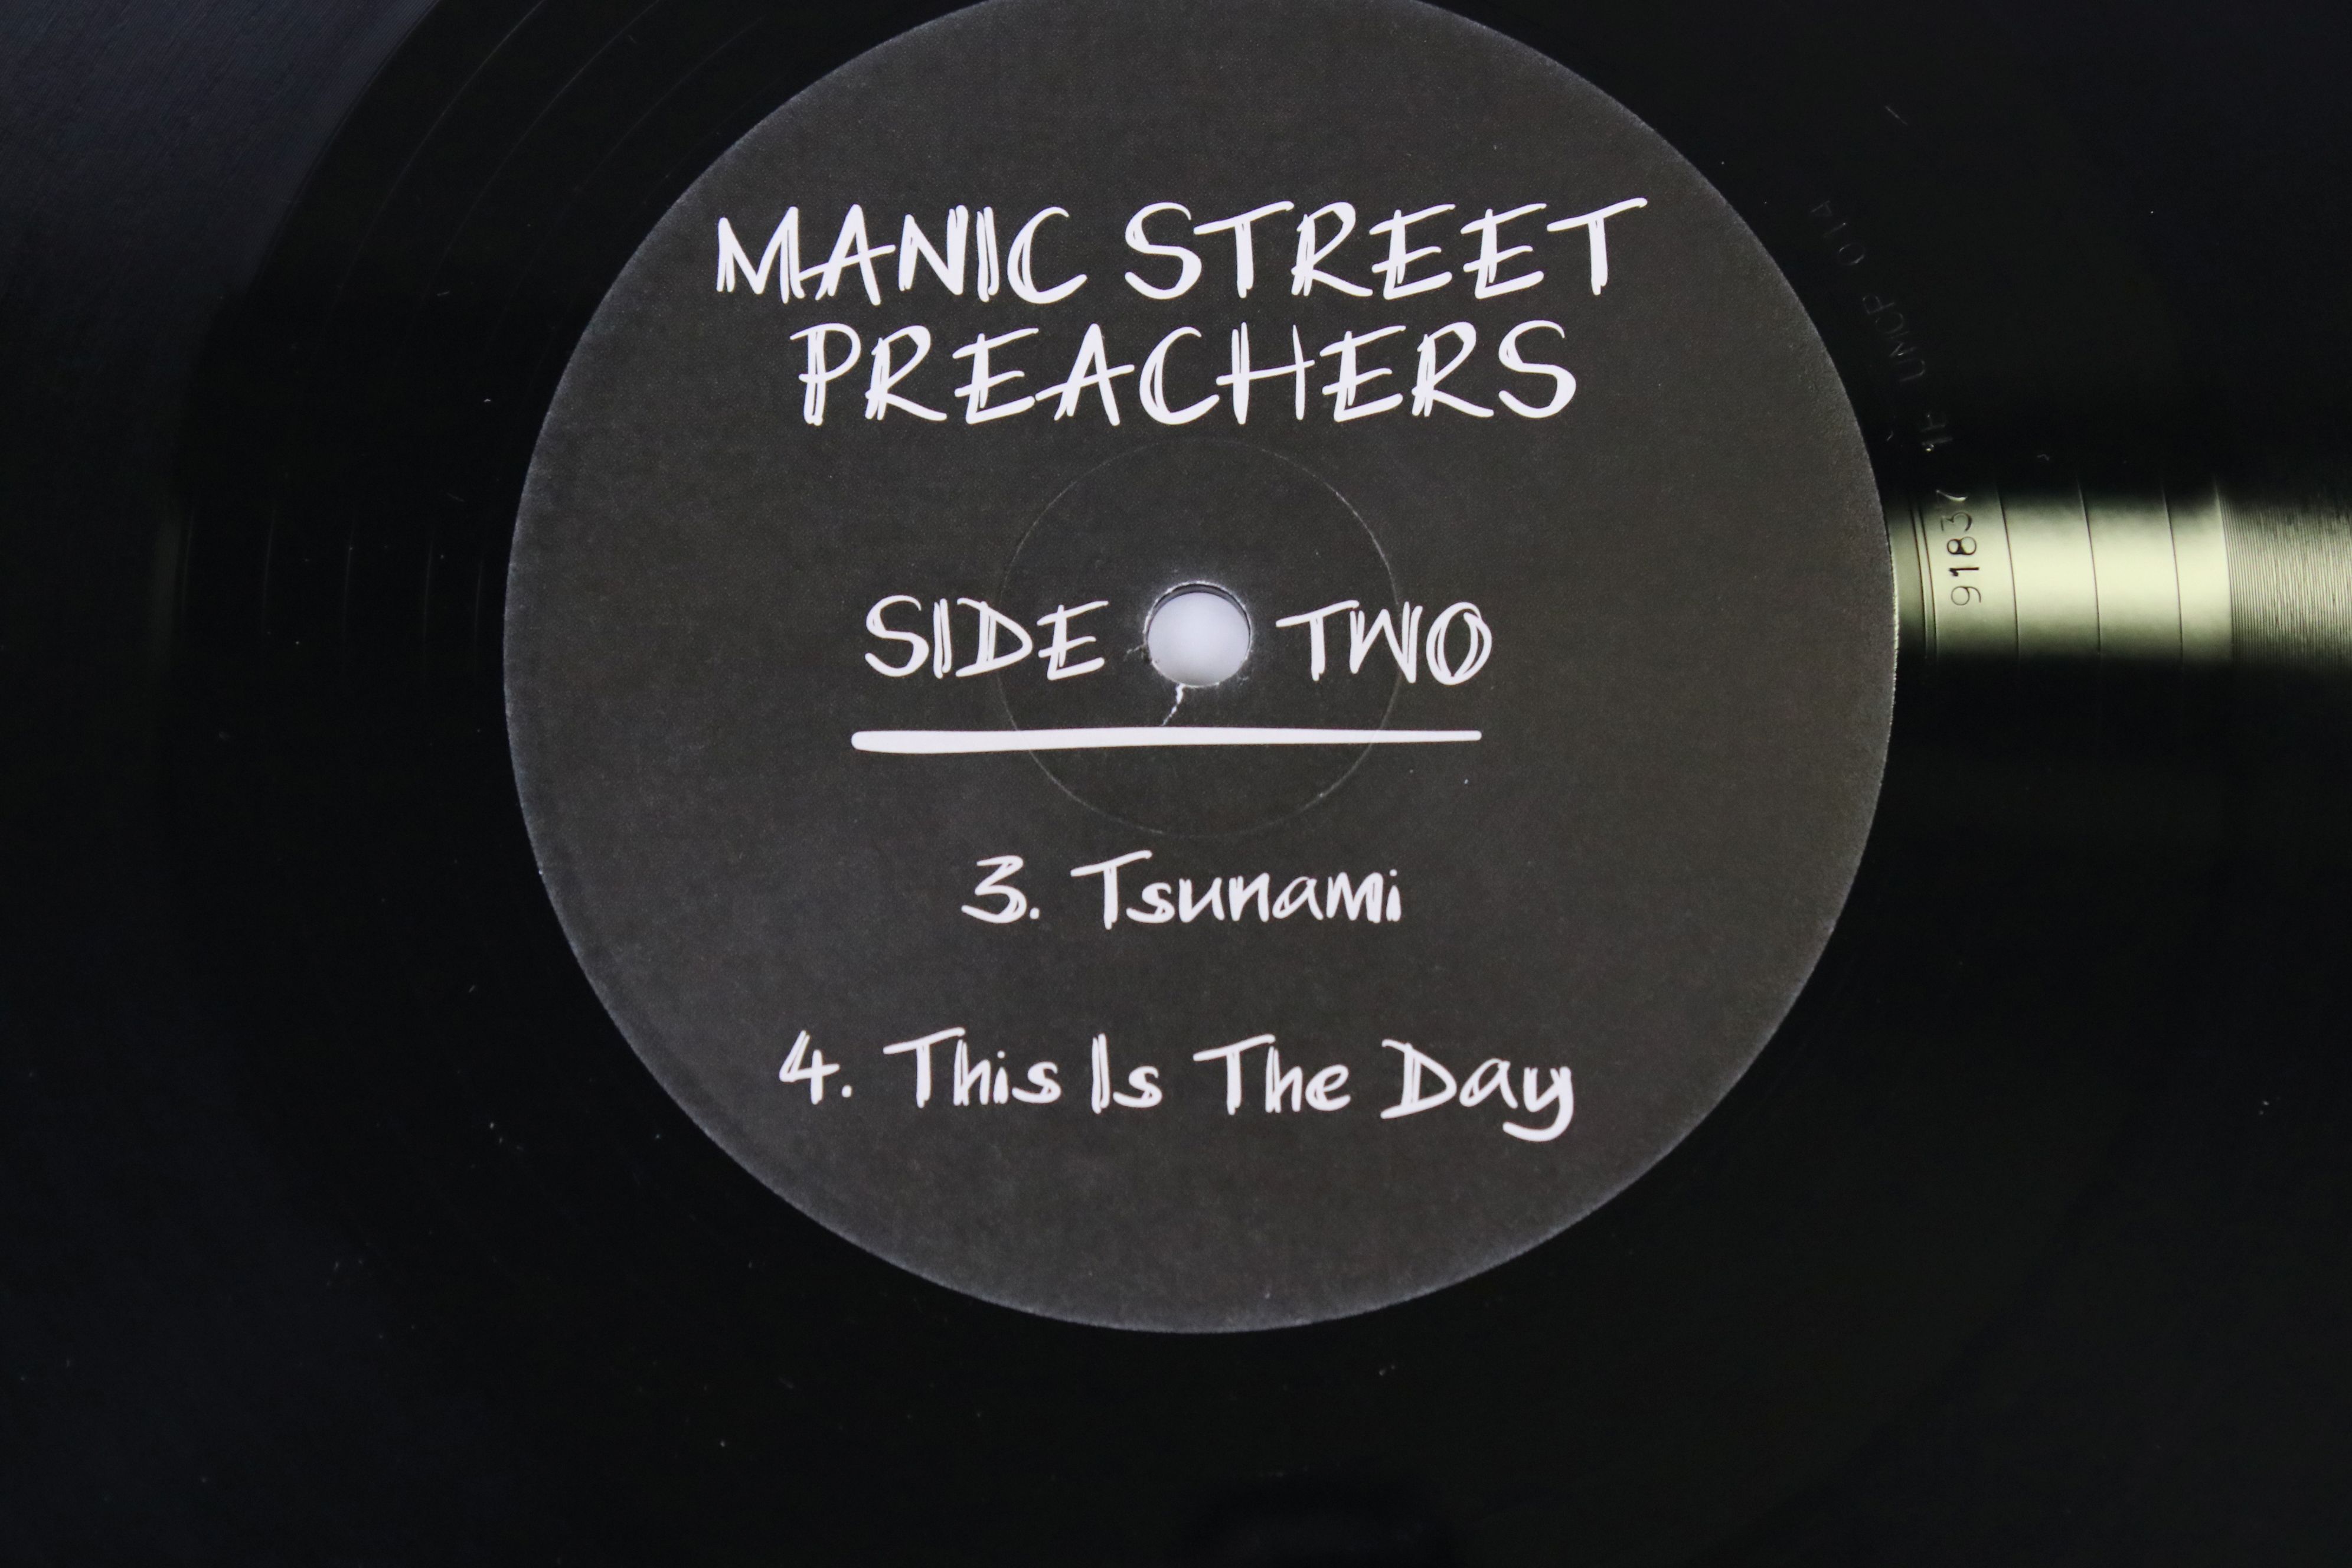 Vinyl - Manic Street Preachers 'Memory Is The Greatest Gallery...' 12" single On Track with SEAT - Image 3 of 4